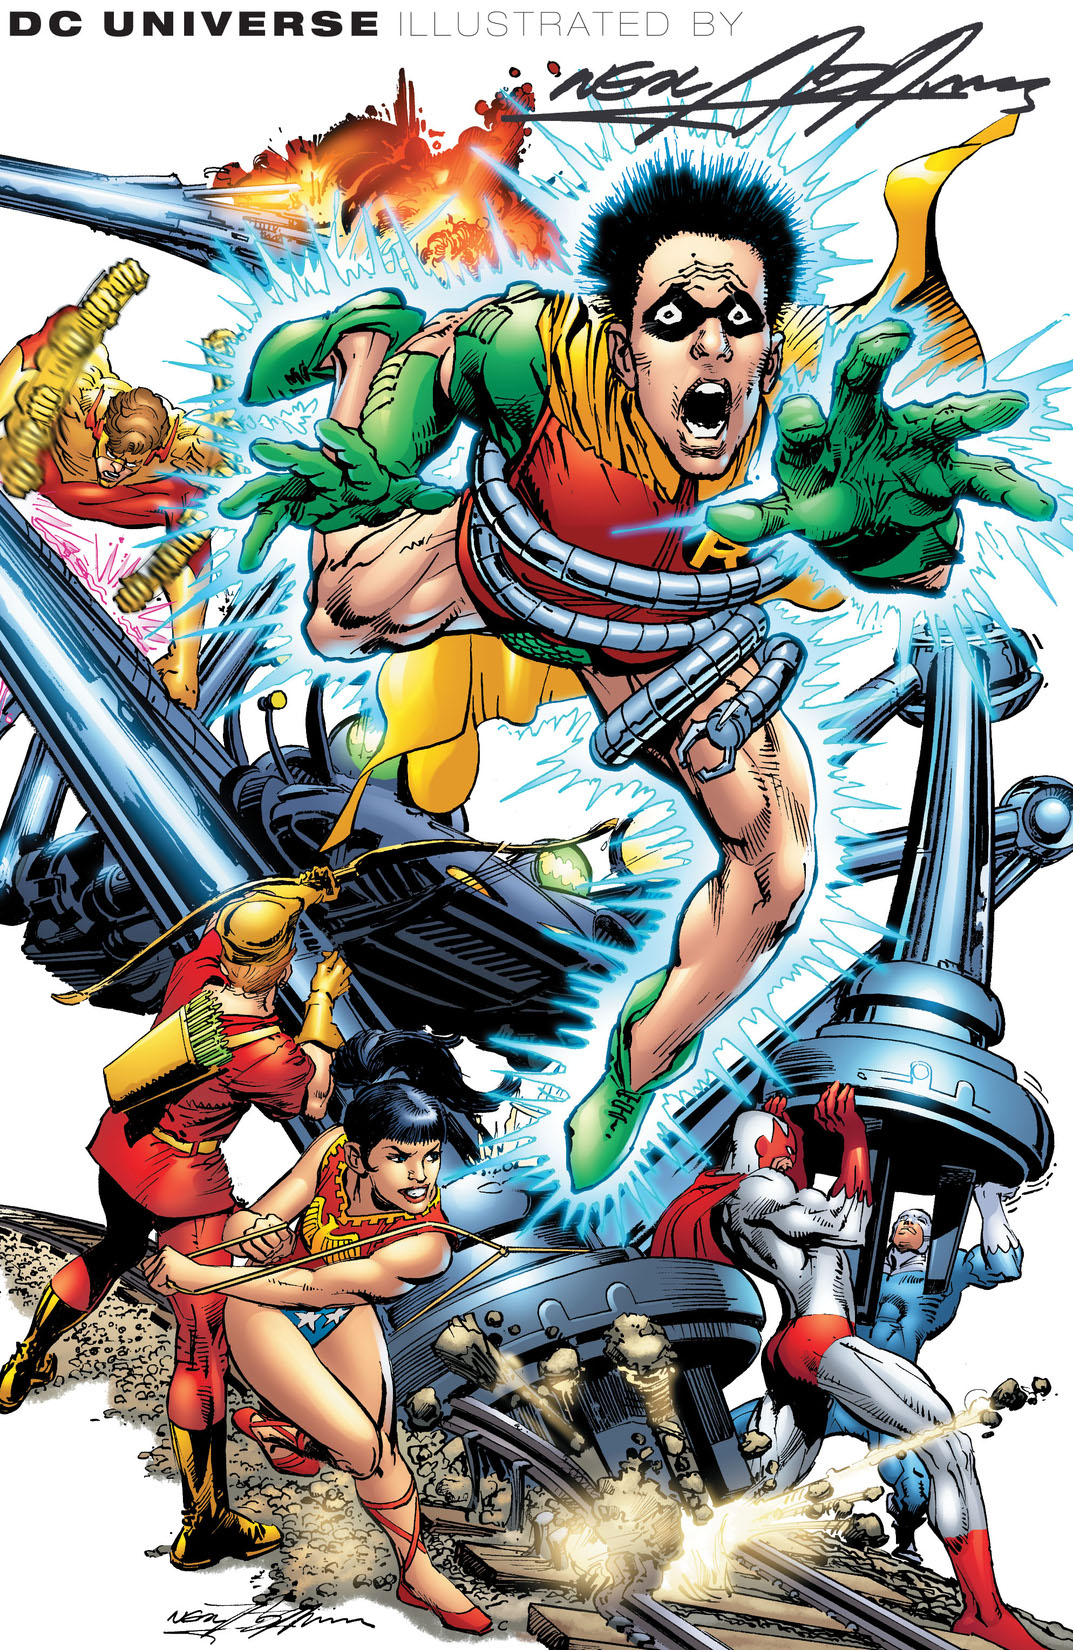 DC Universe Illustrated By Neal Adams preview images